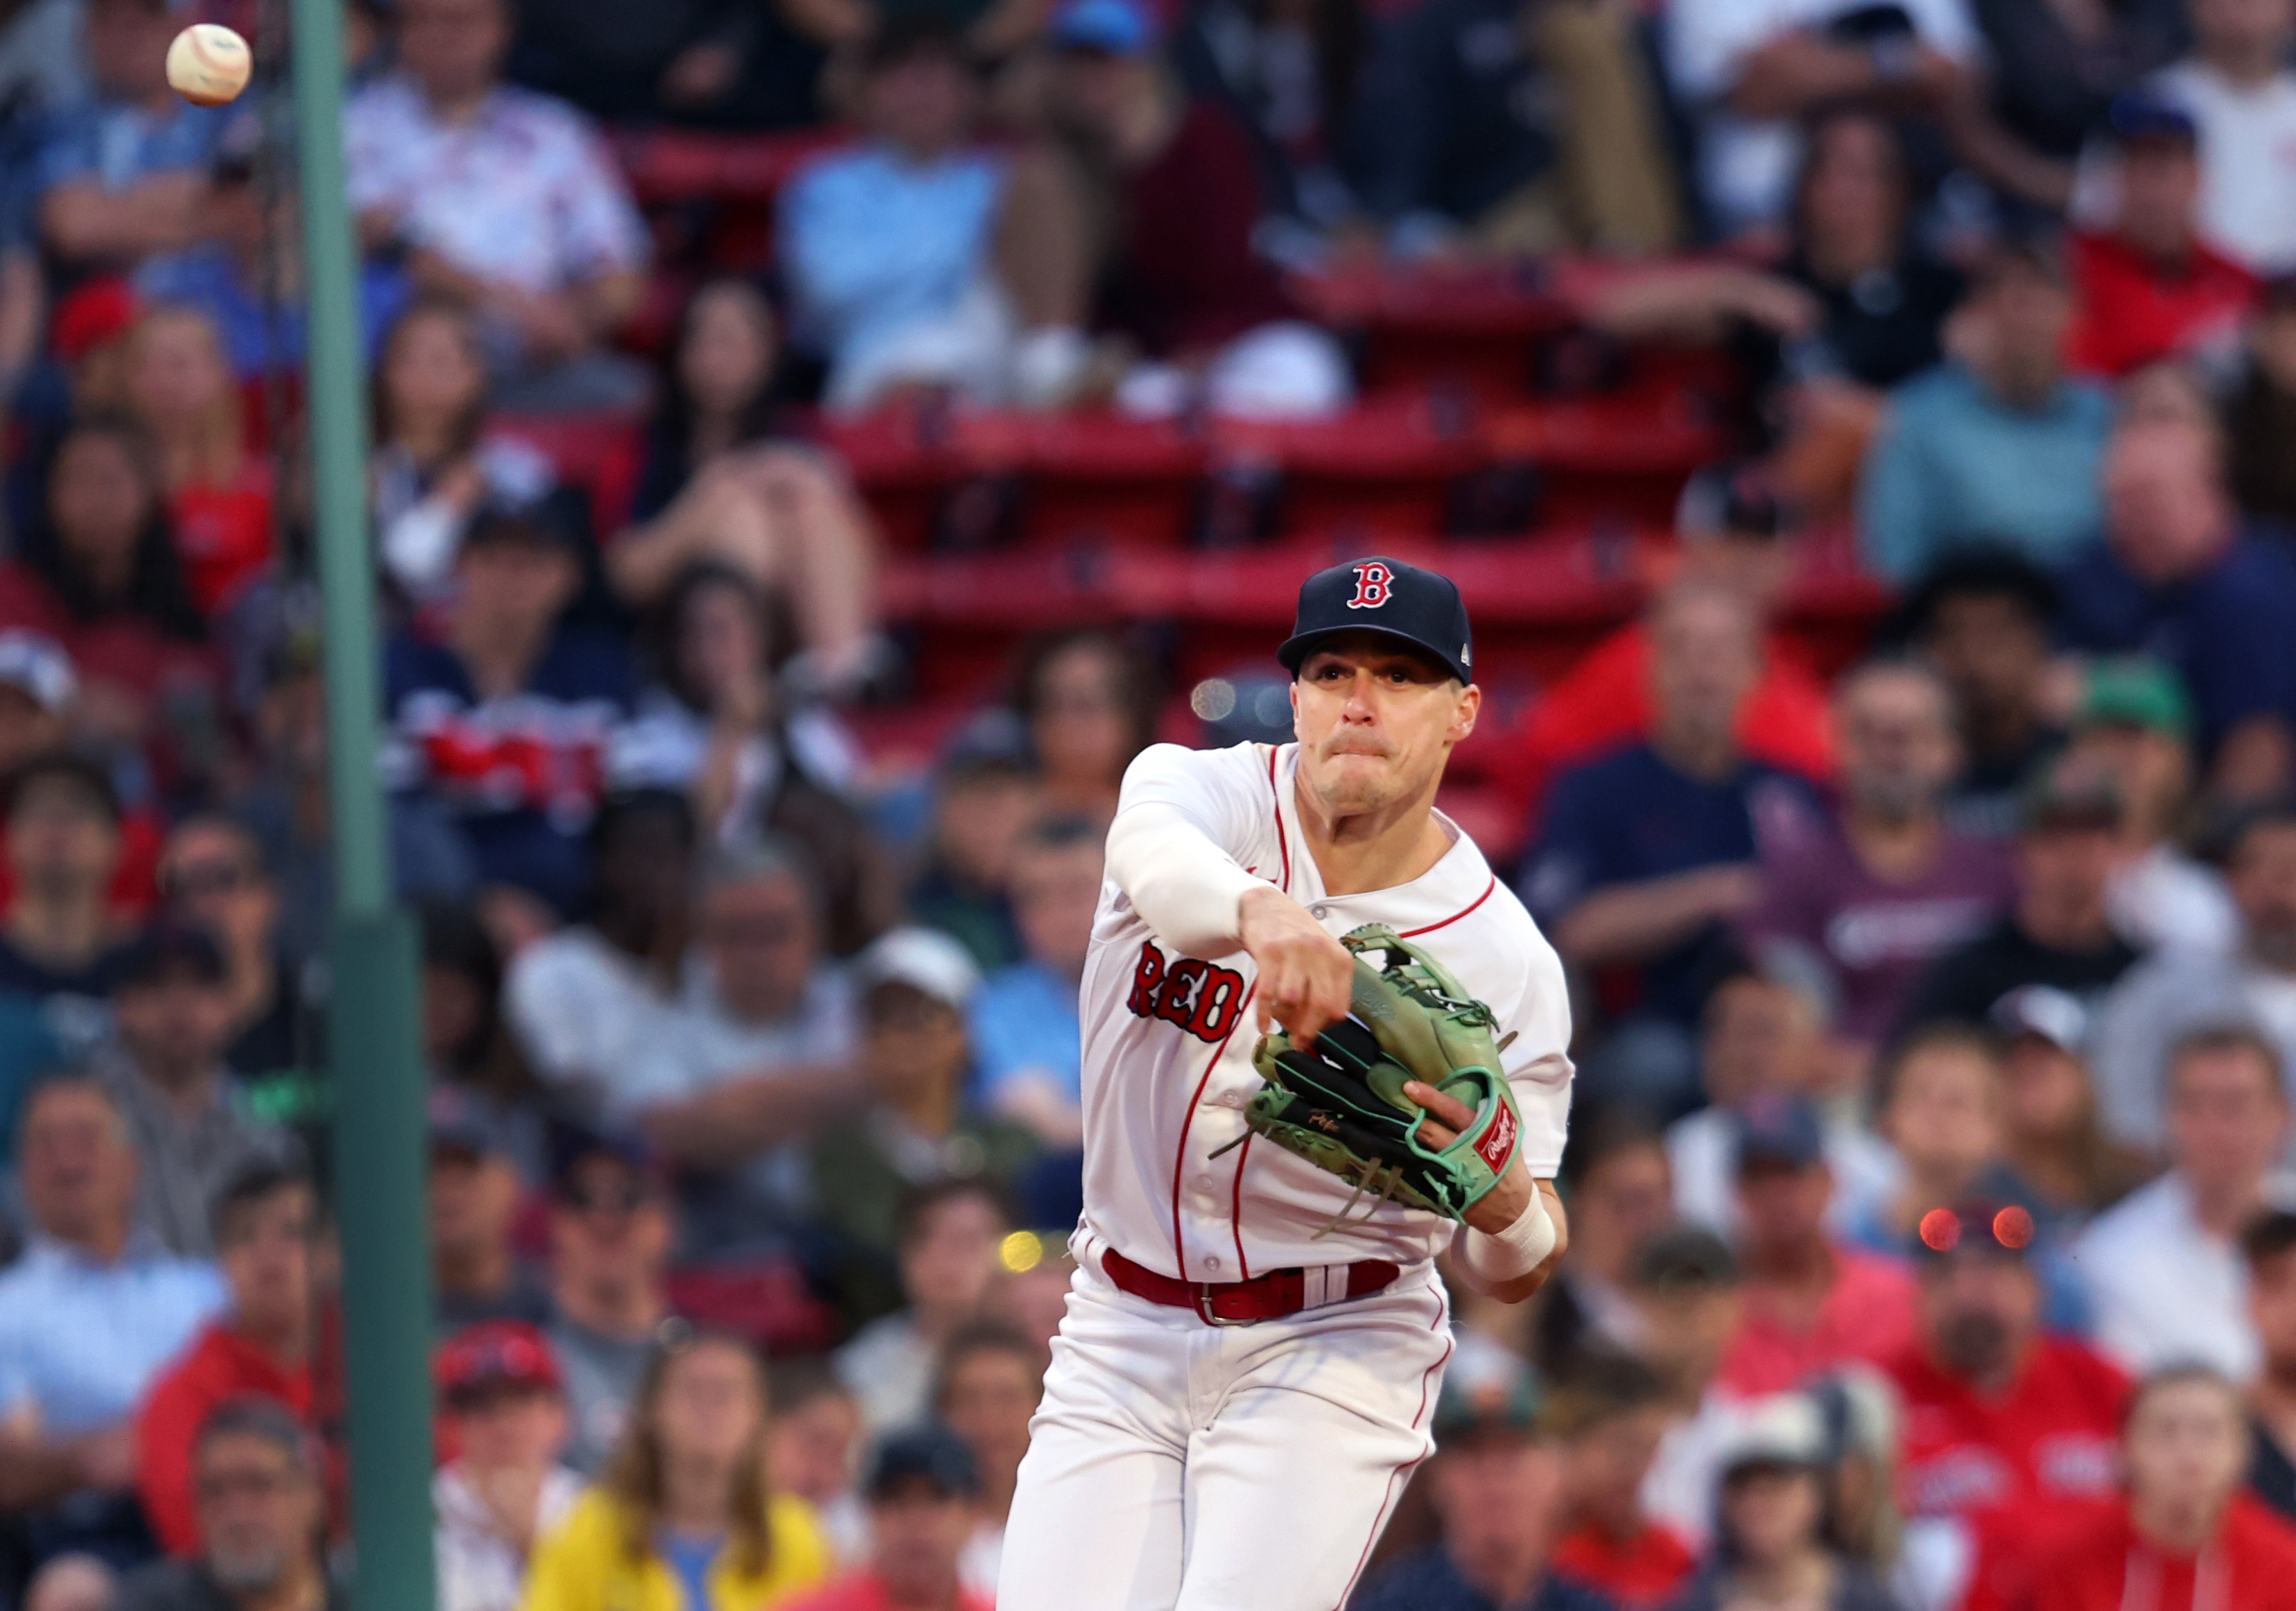 Red Sox shortstop Kiké Hernández: I need to be better